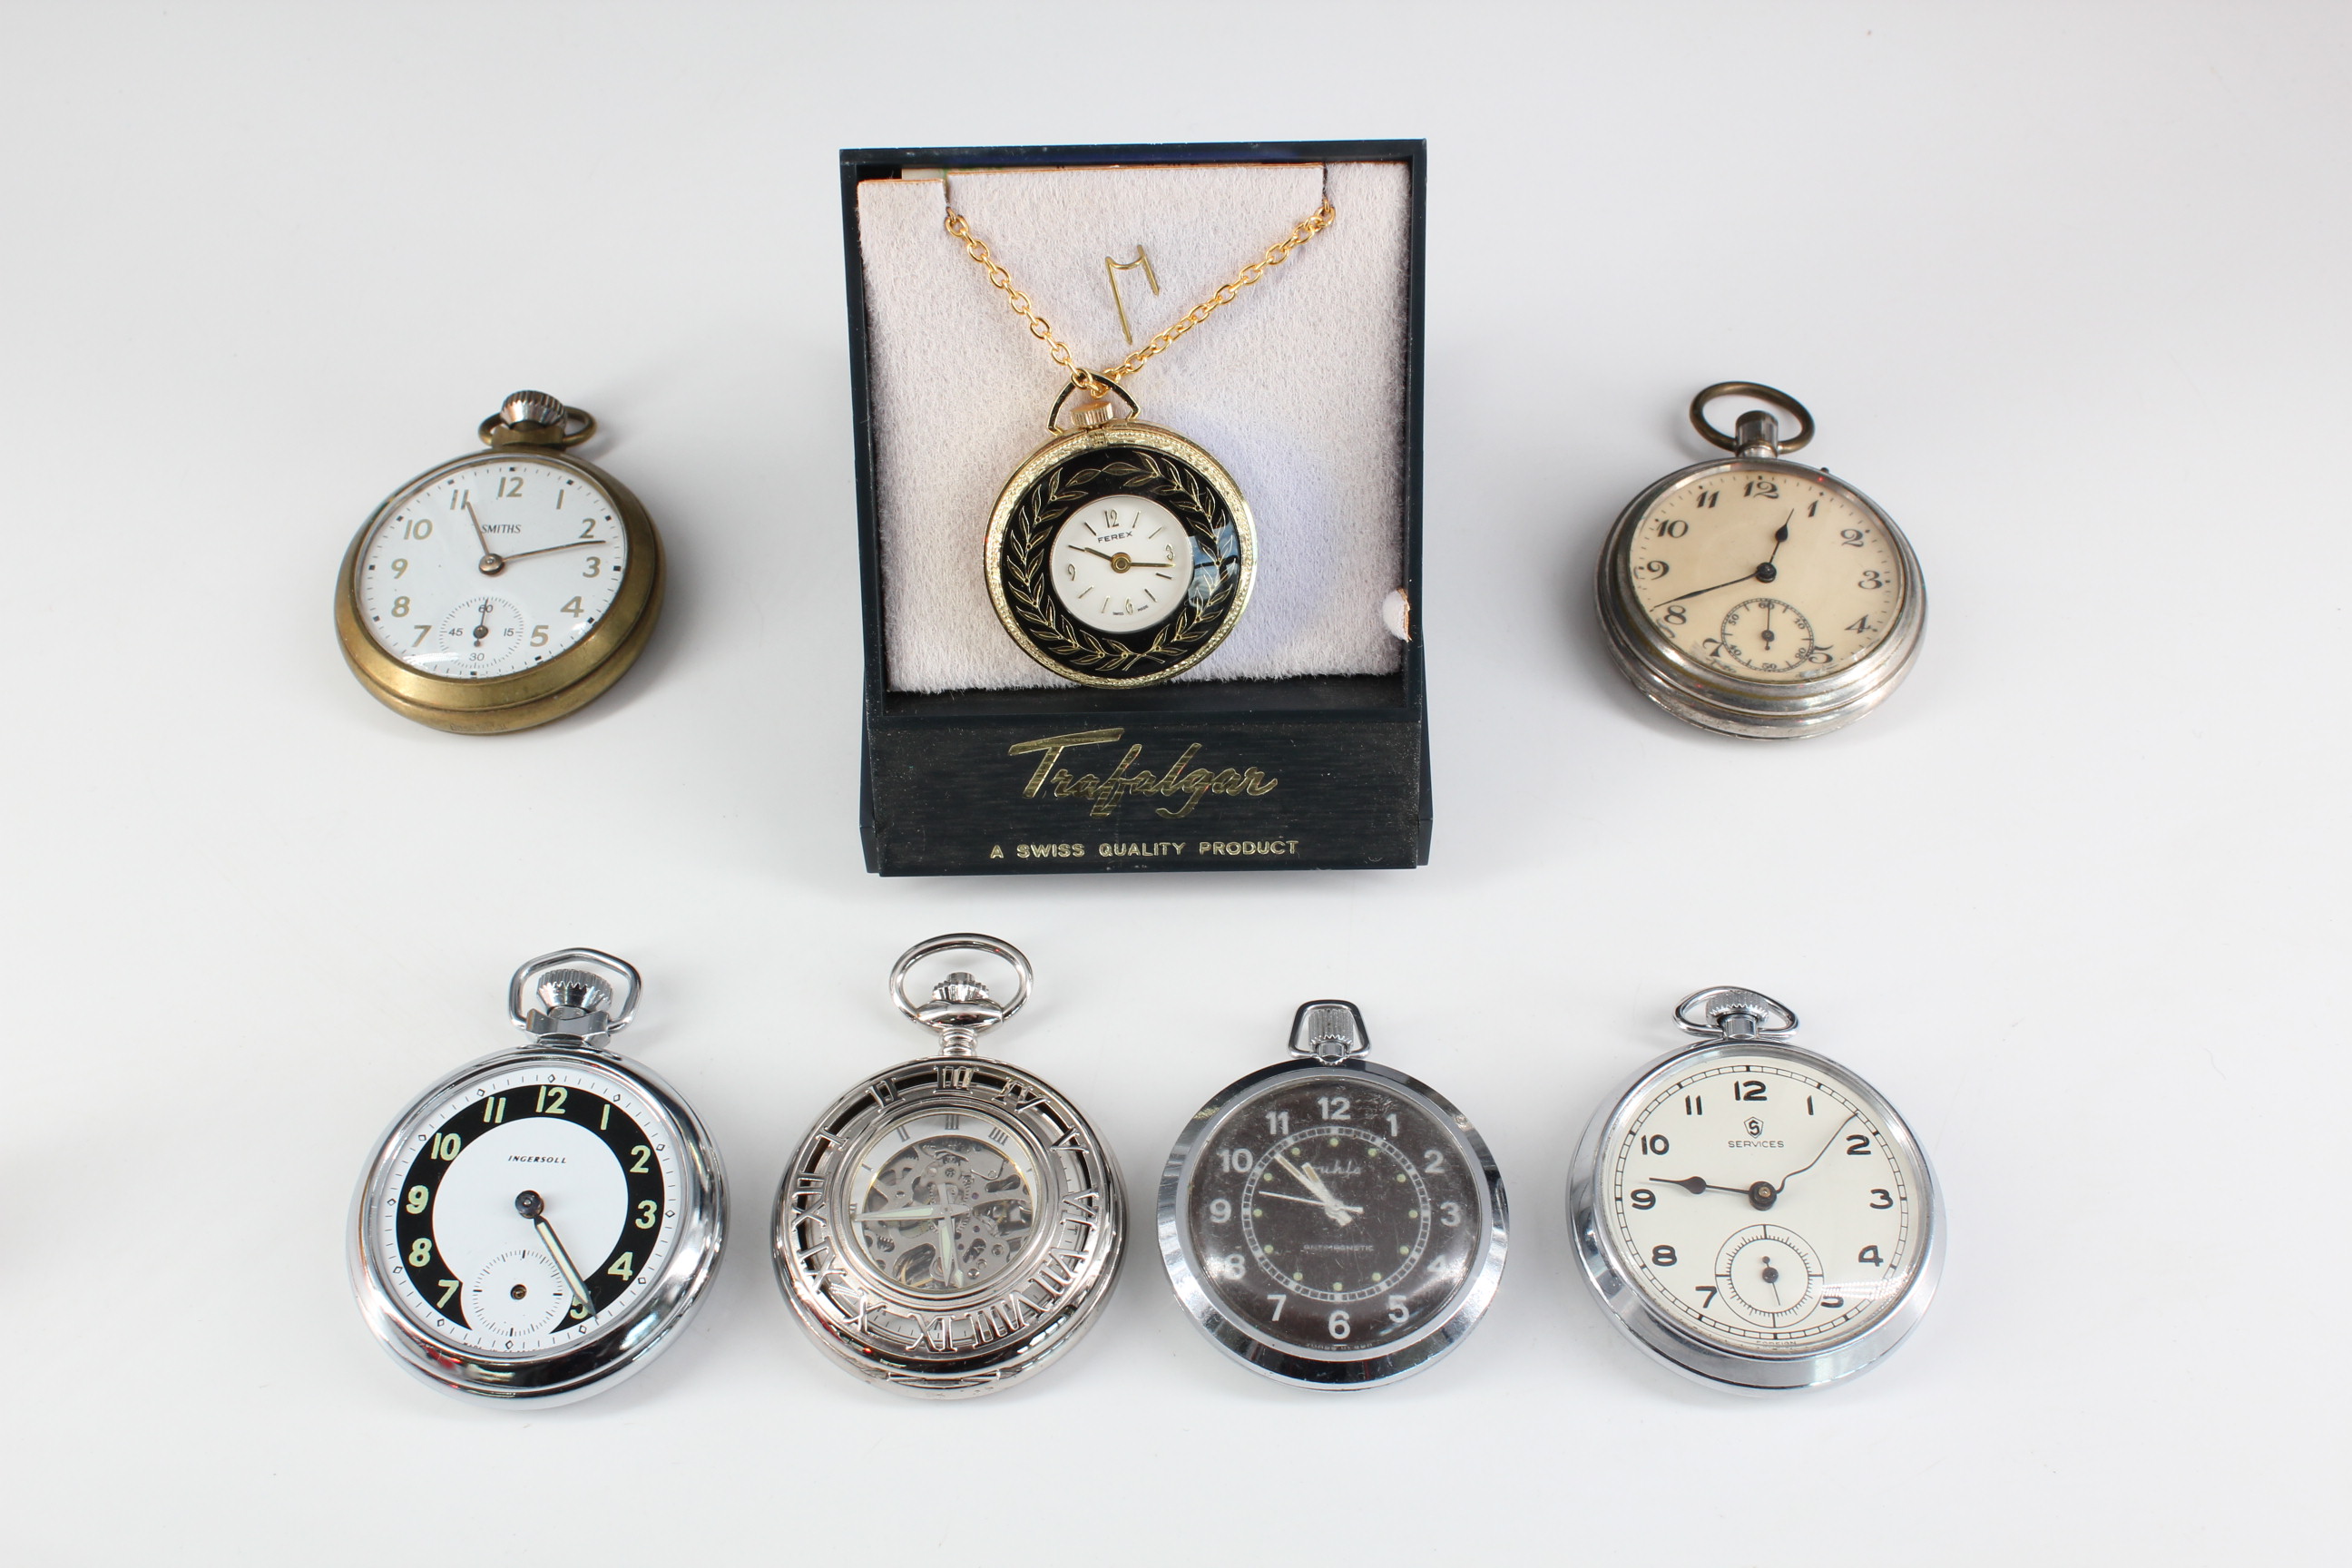 Six various vintage pocket watches, circa 1950s - 1960s, together with a late 20th Century "